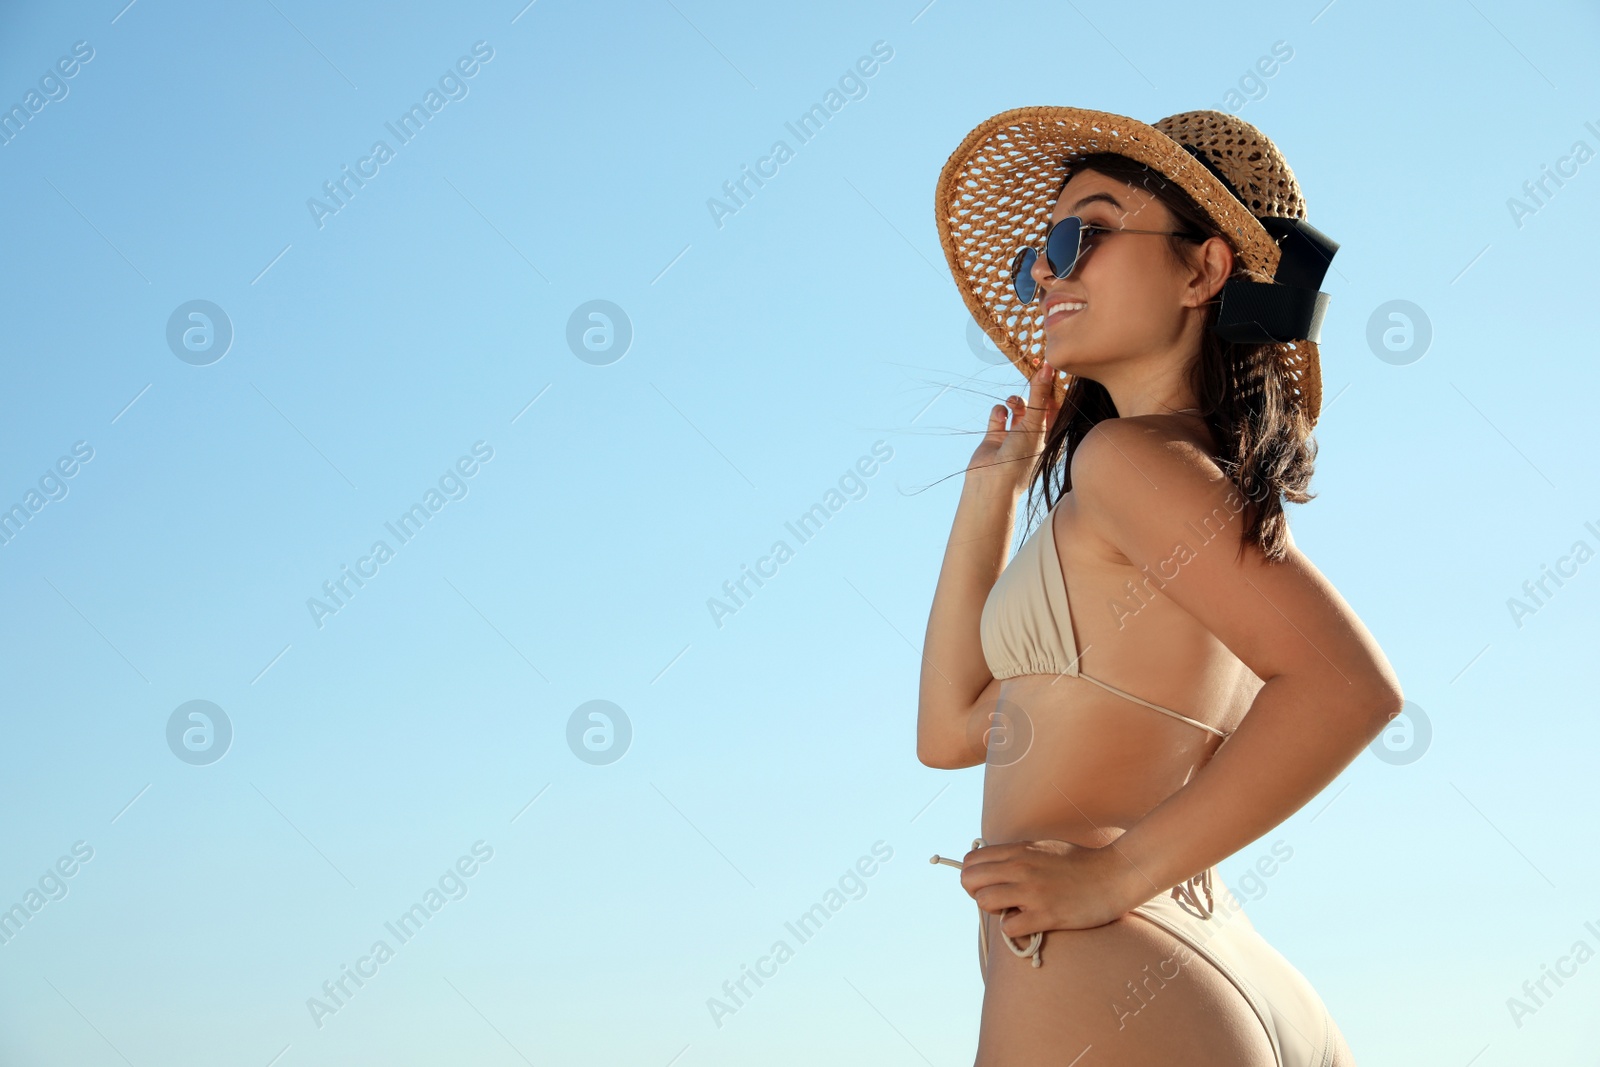 Photo of Beautiful young woman with attractive body against blue sky. Space for text